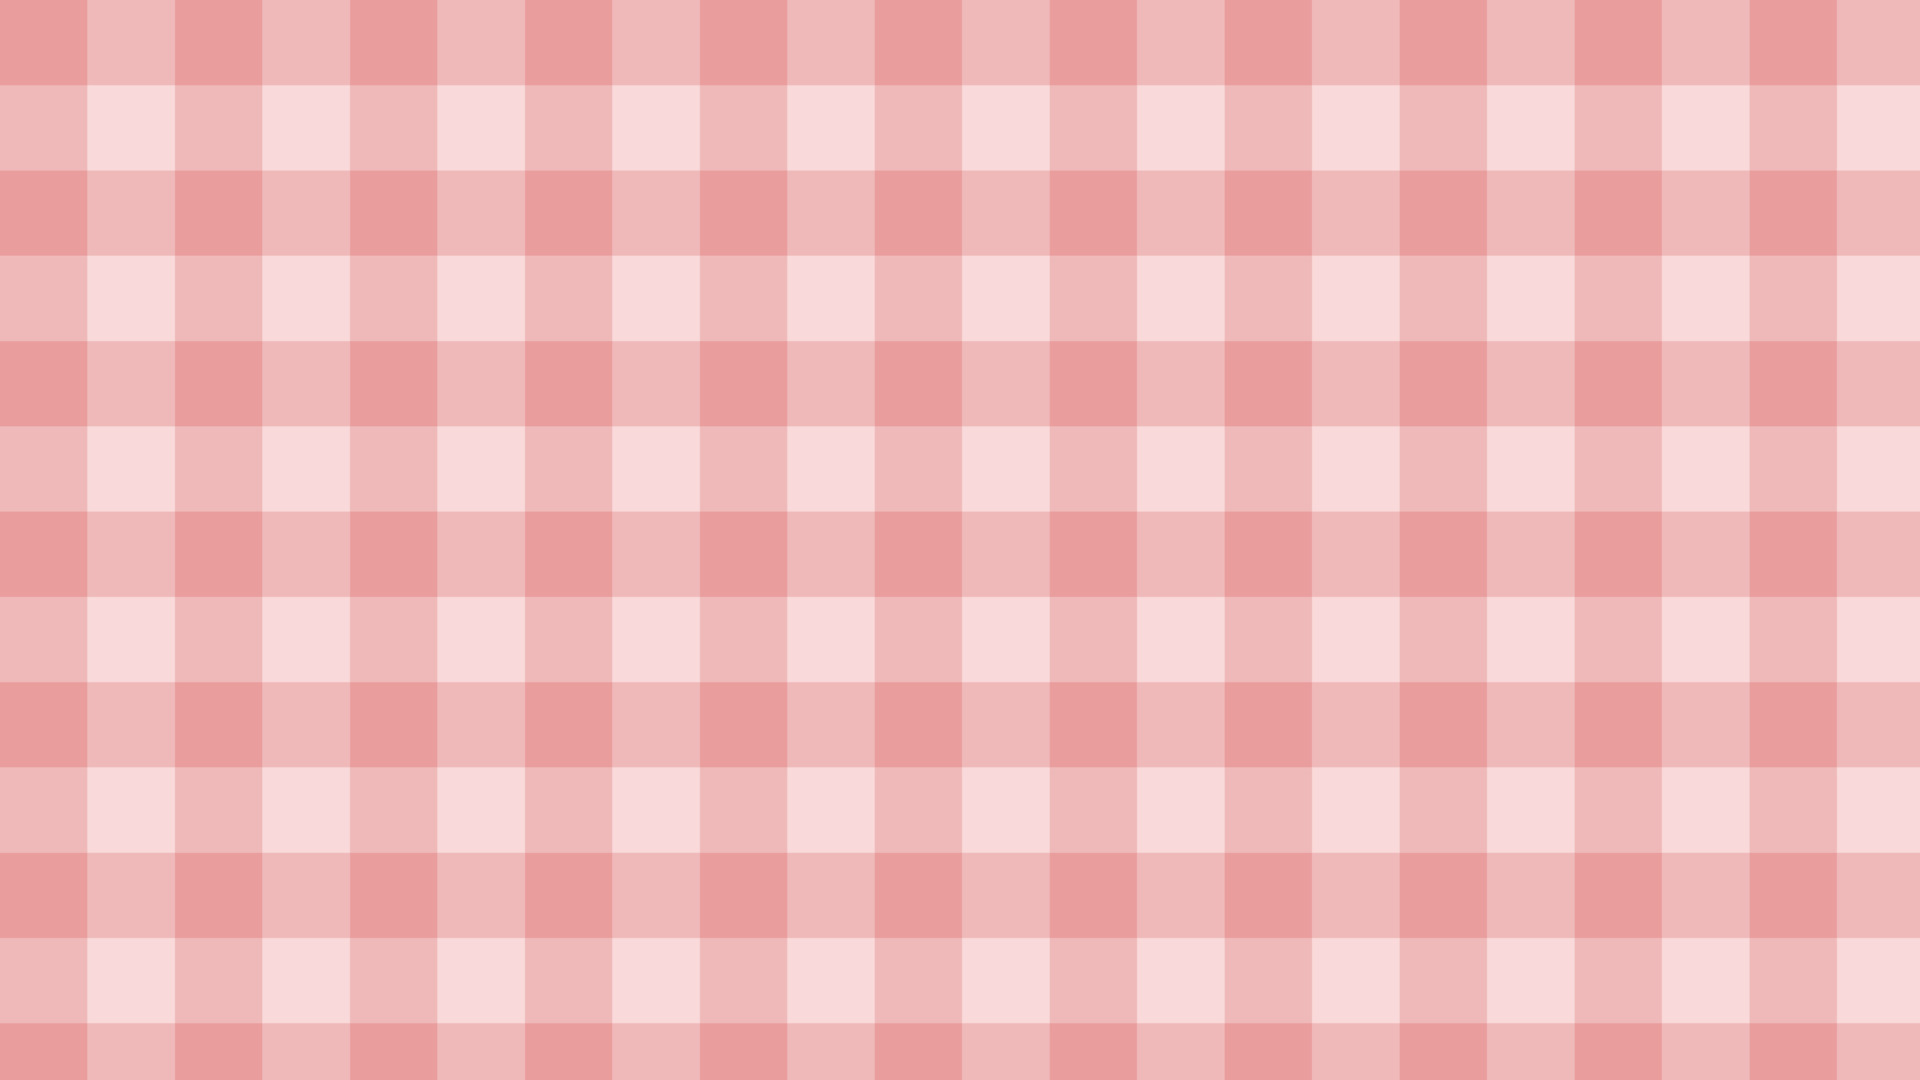 cute pink big gingham, checkers, plaid, aesthetic checkerboard wallpaper illustration, perfect for wallpaper, backdrop, postcard, background for your design